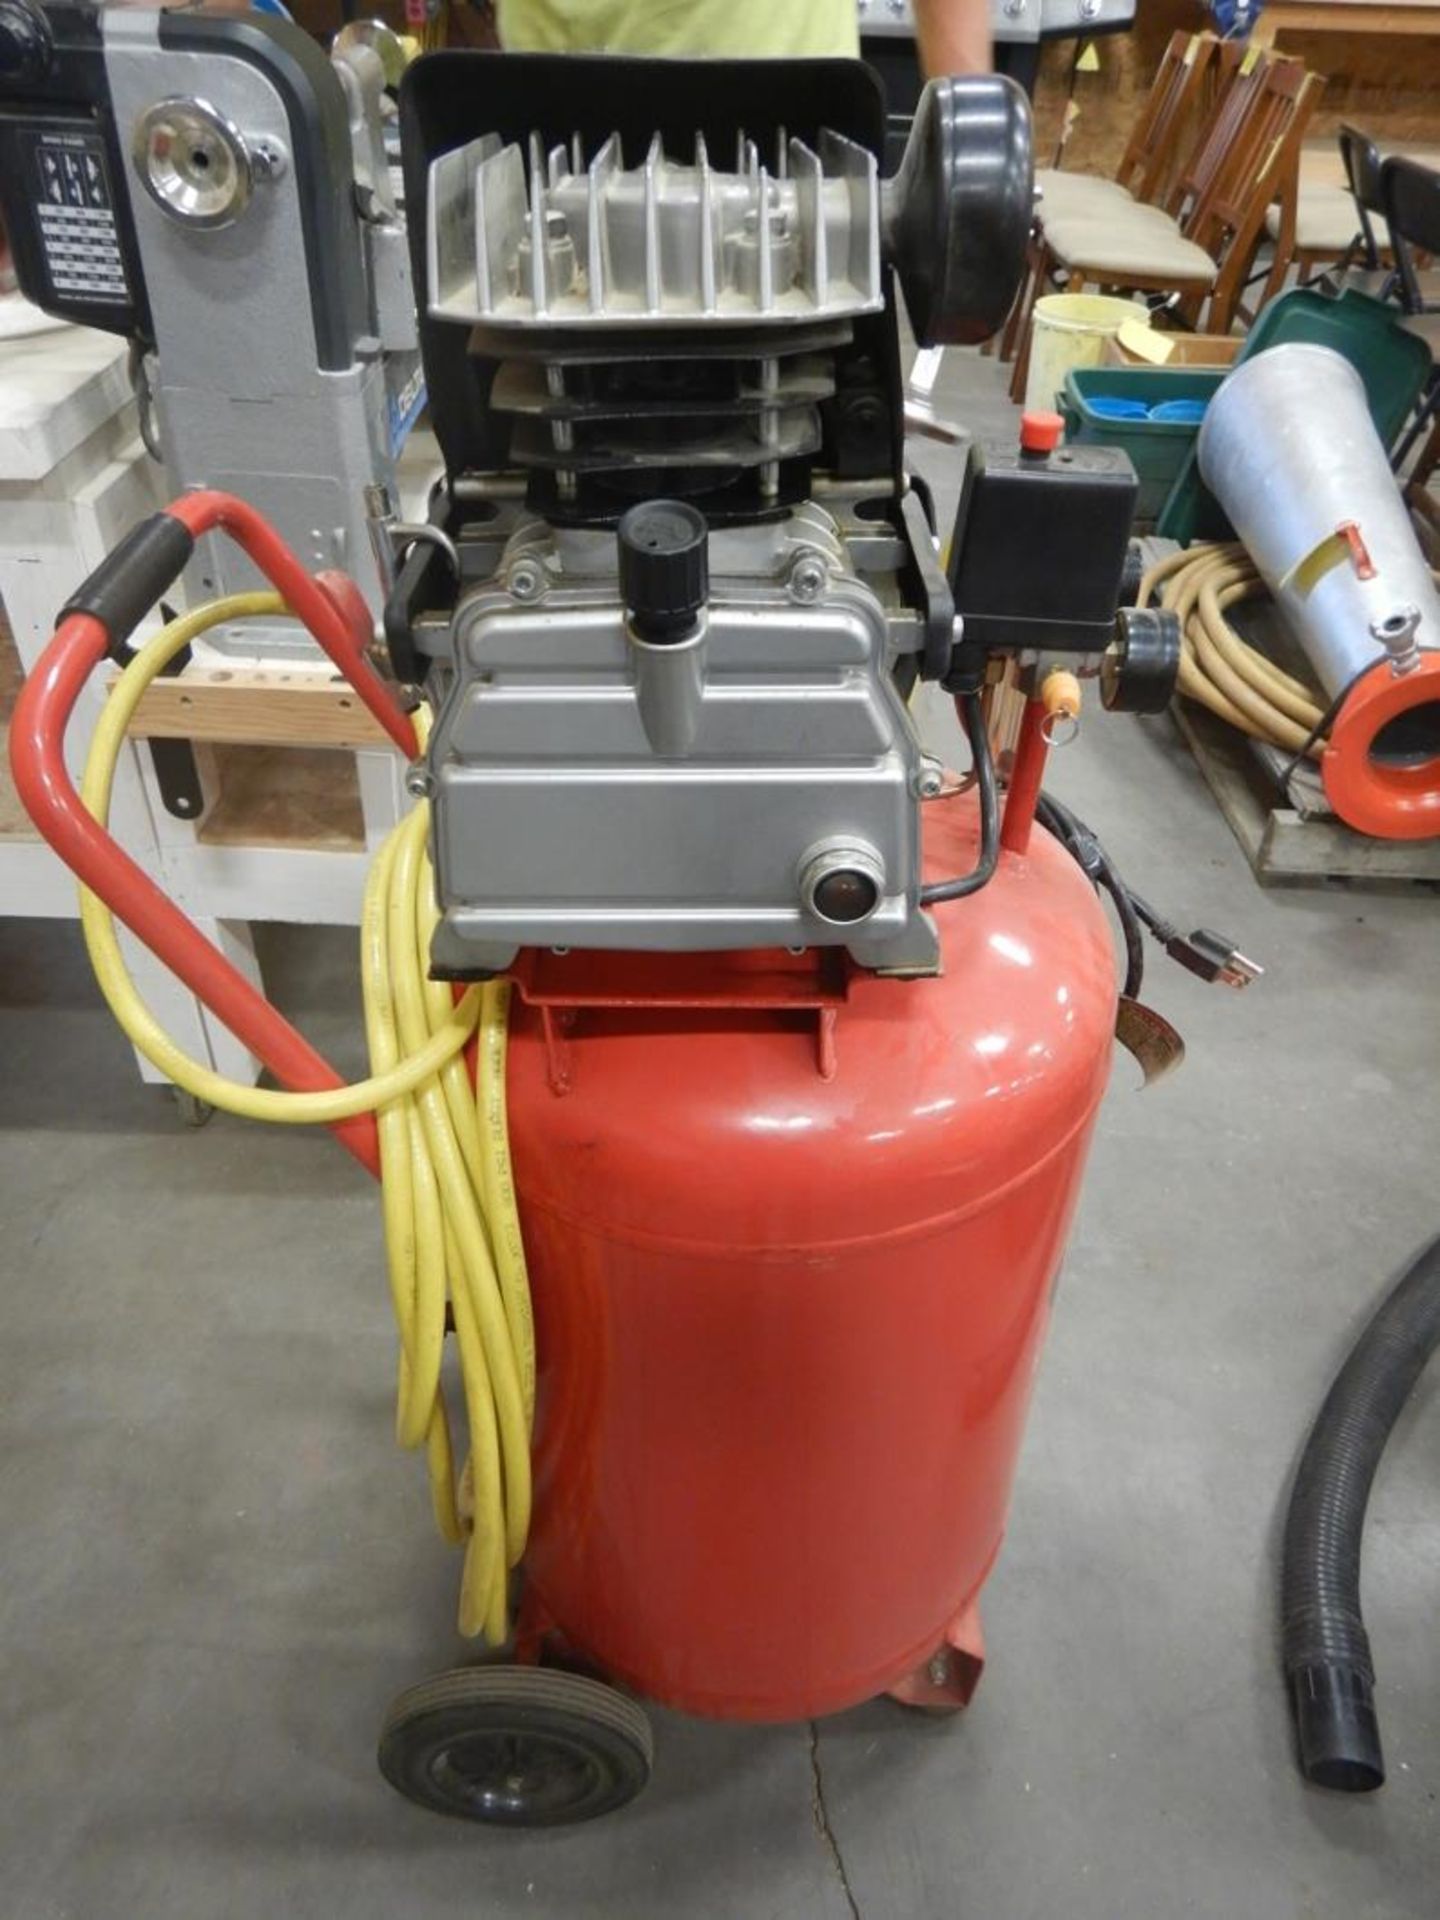 KING CANADA PERFORMANCE PLUS UPRIGHT 5HP AIR COMPRESSOR W/ HOSE - Image 6 of 8